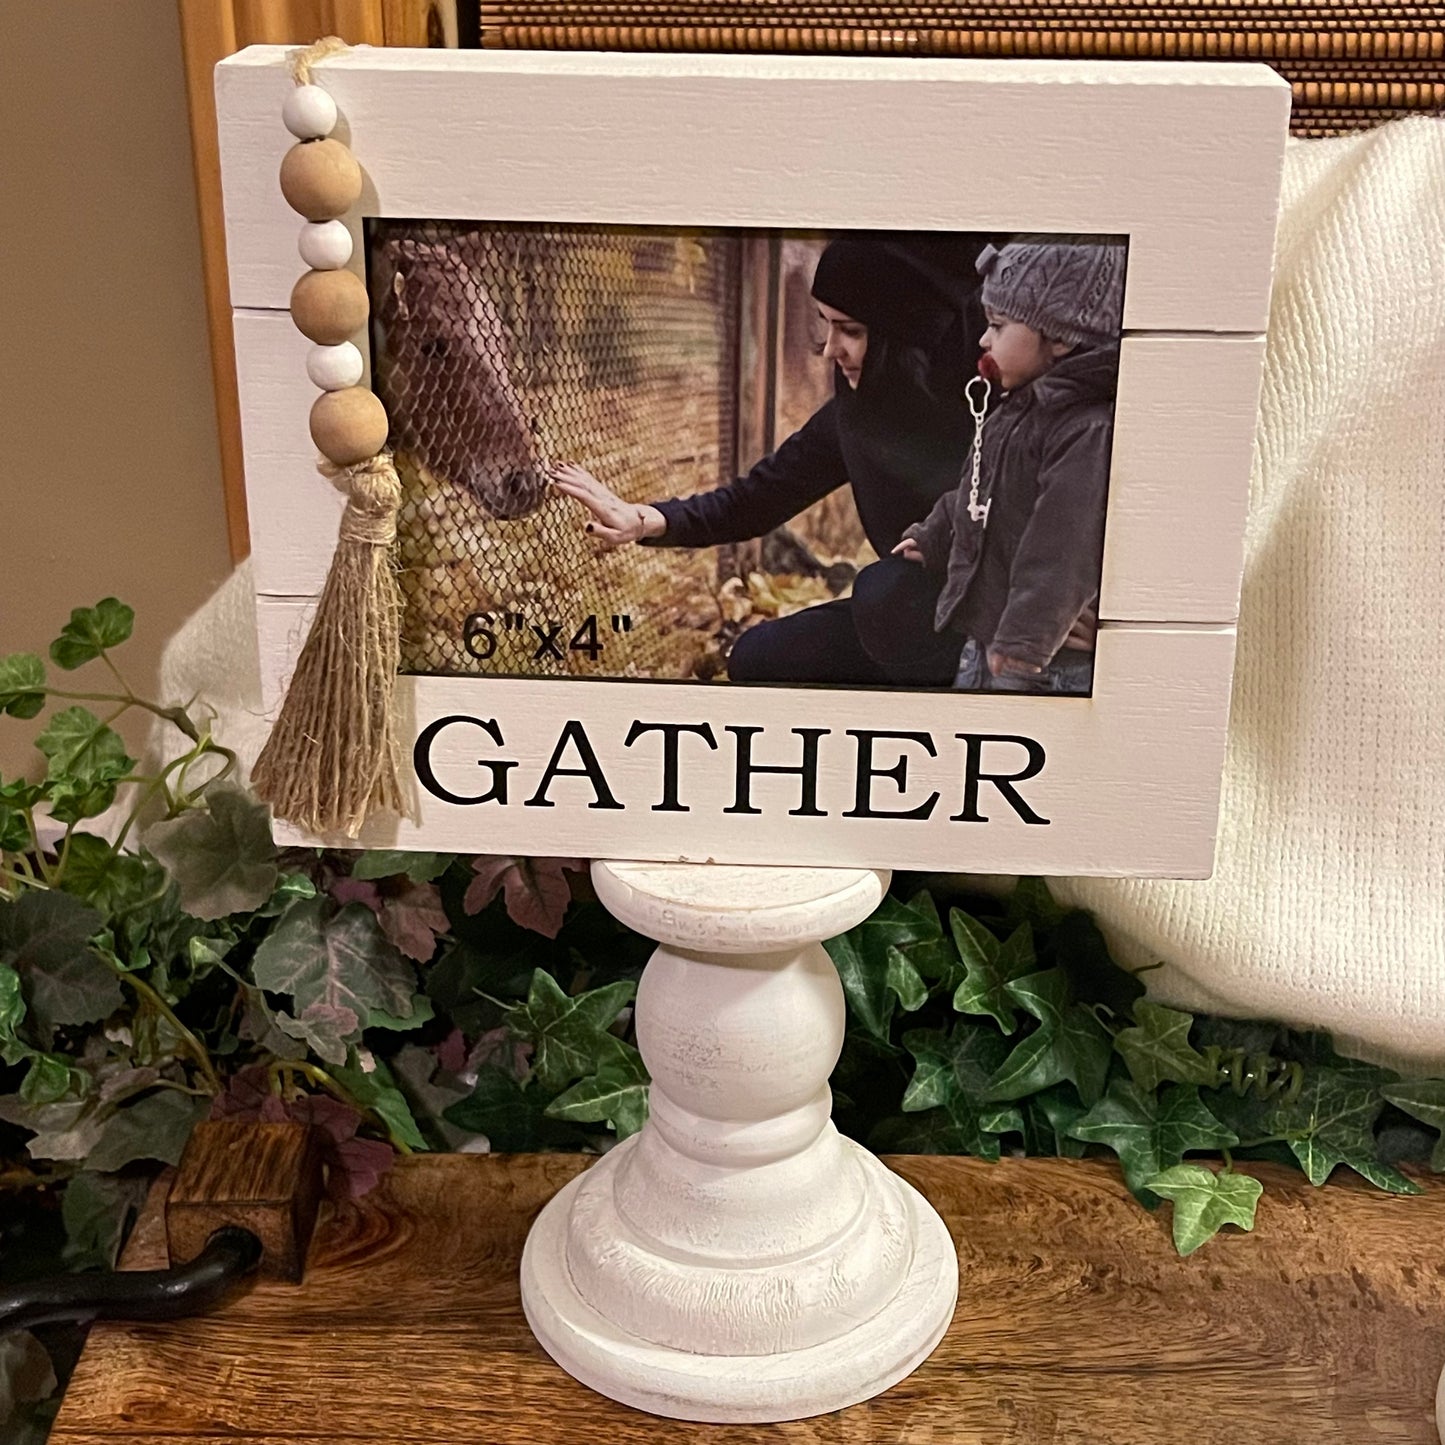 Gather 6x4 Frame or Home Candle Holder